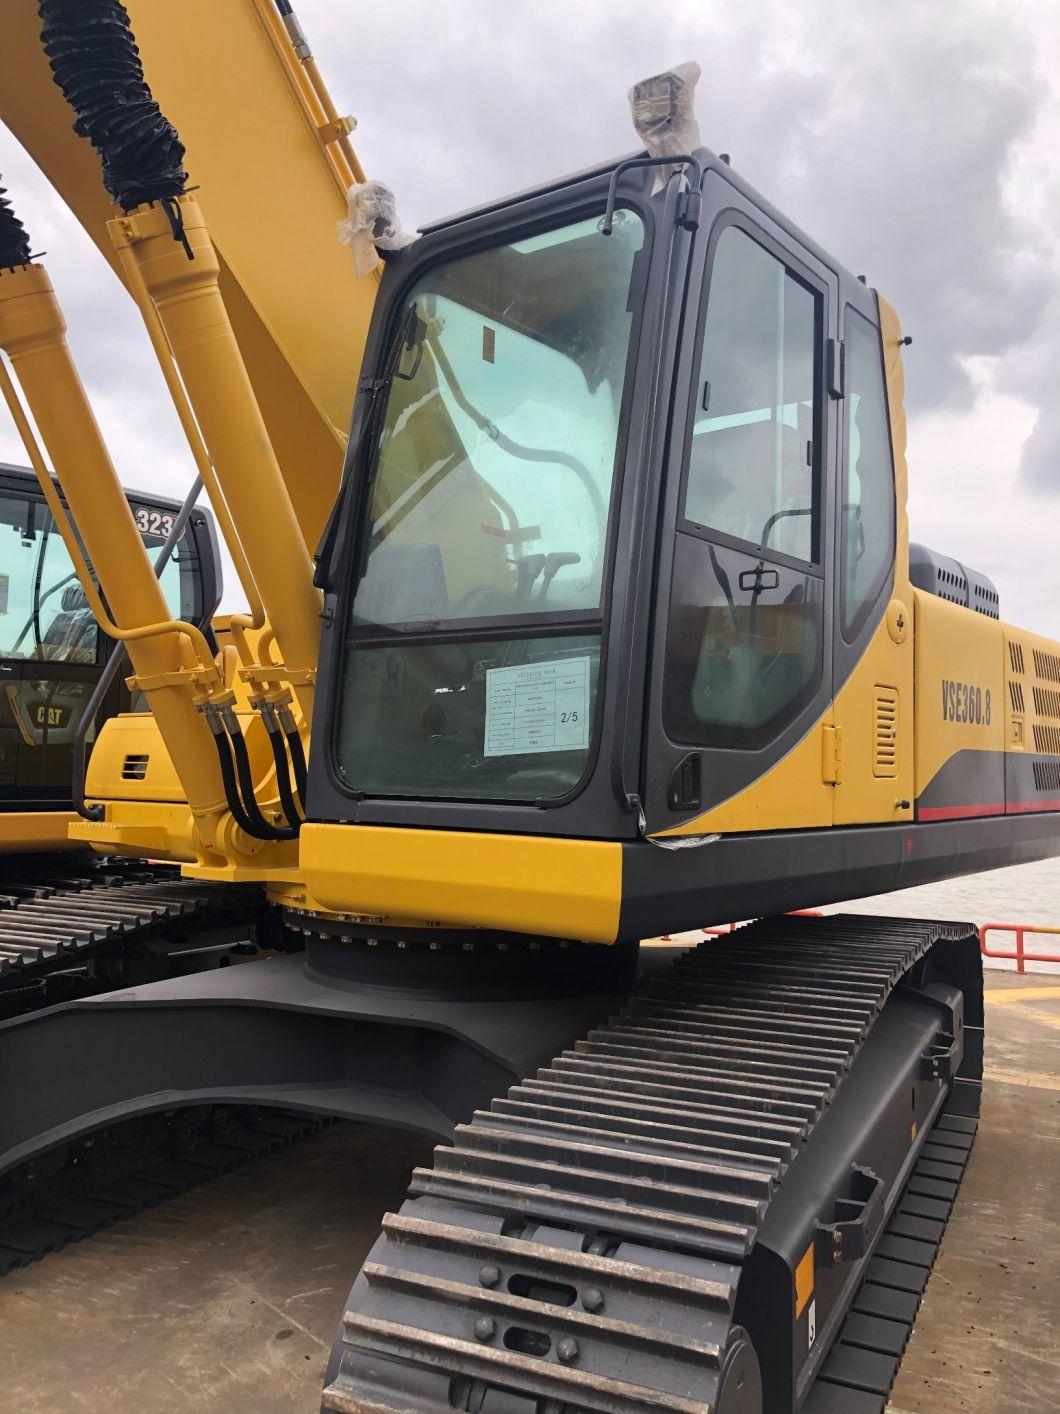 Vse360.8 Chinese Cheep Price 35ton Crawler Excavator with High Quality